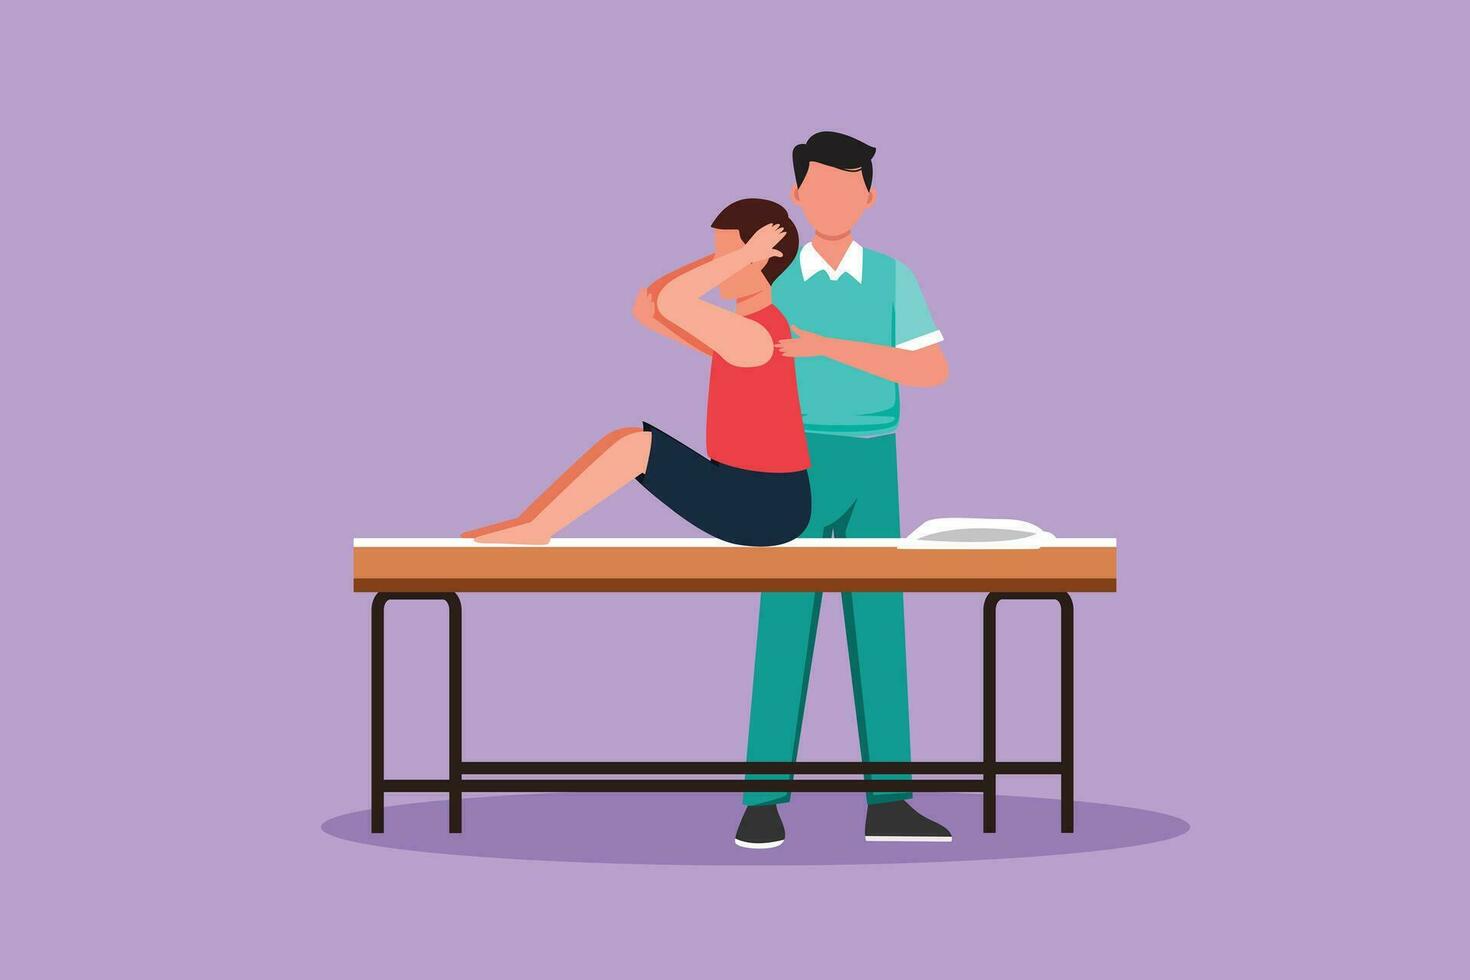 Cartoon flat style drawing of man sitting on massage table masseur doing healing treatment massaging injured patient manual physical therapy medical rehabilitation. Graphic design vector illustration